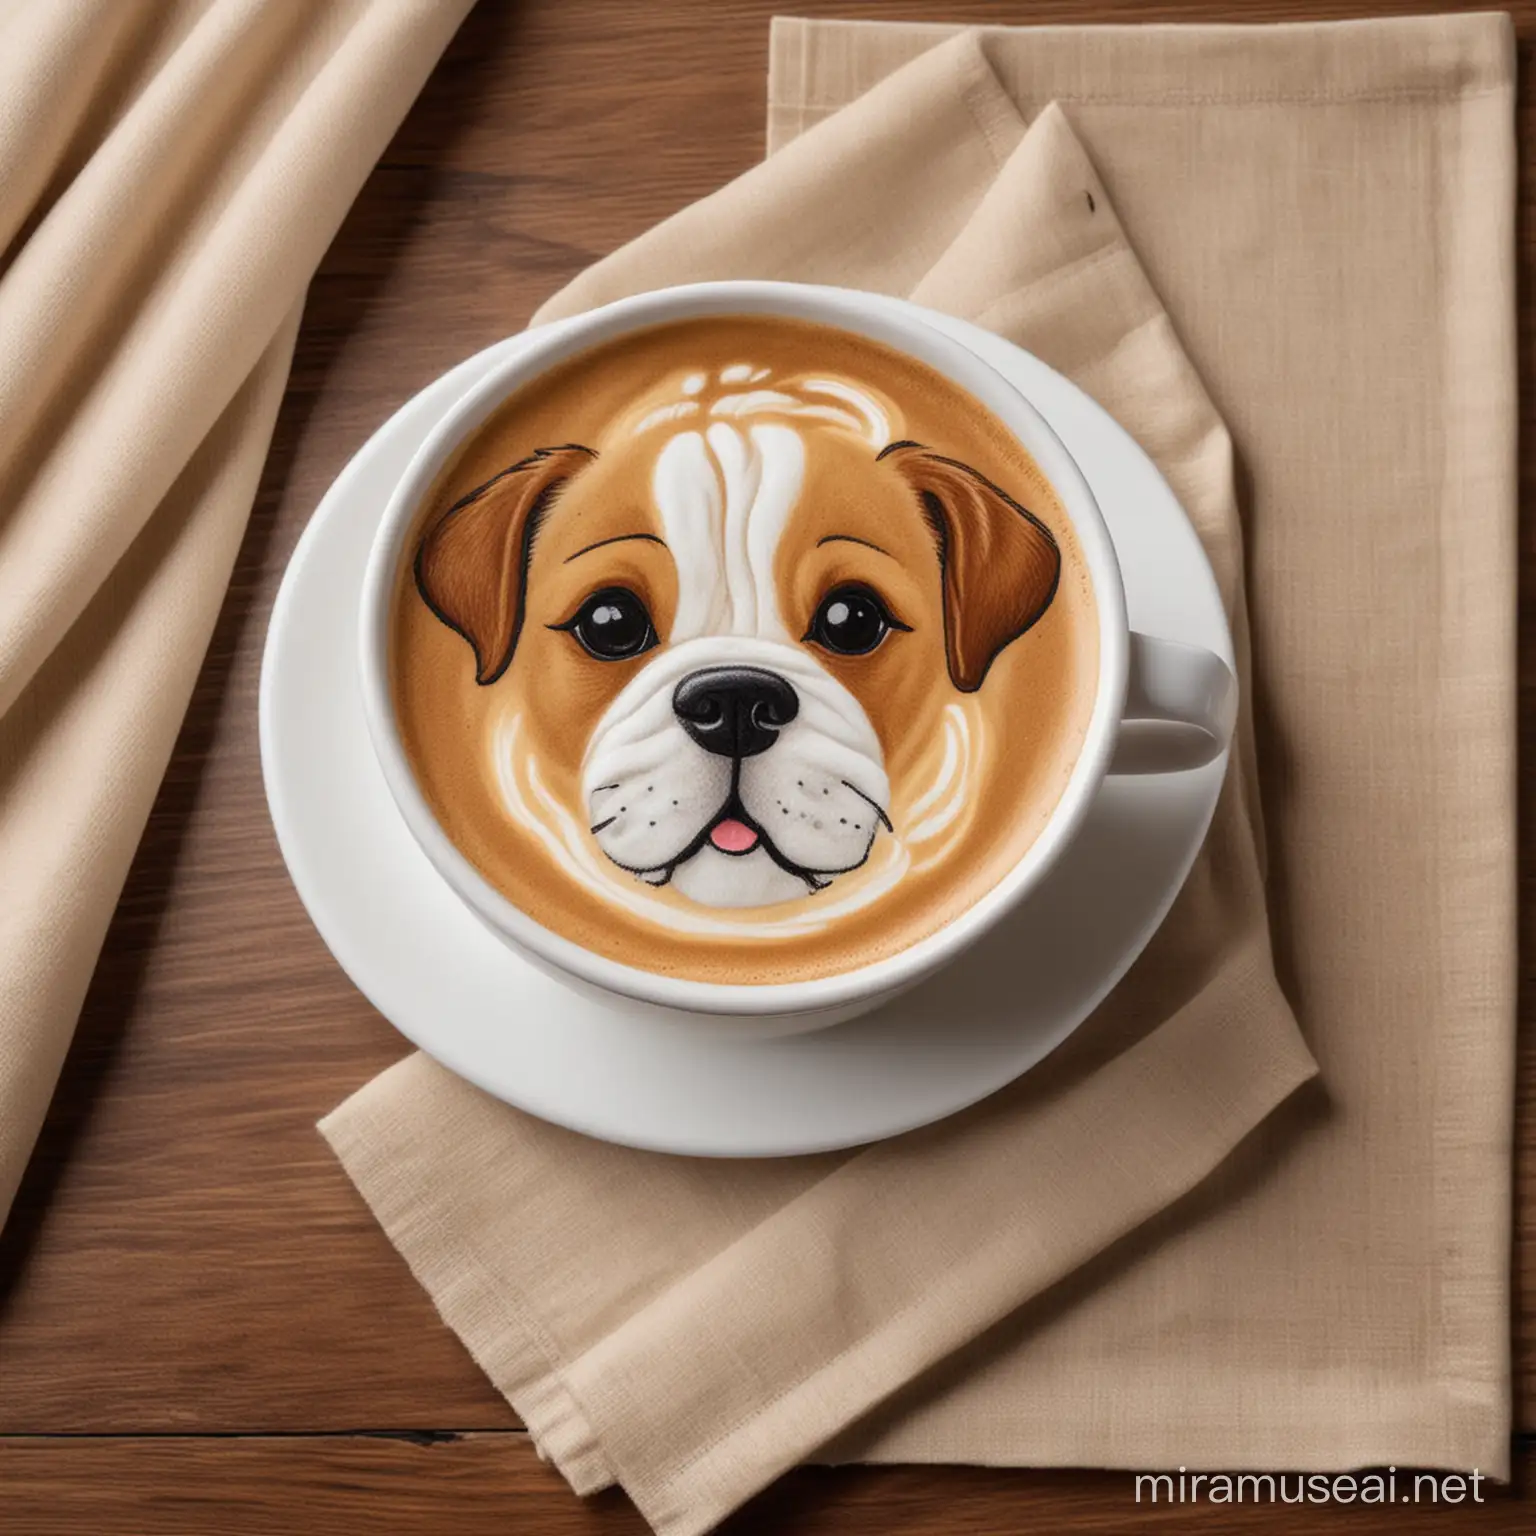 coffee cup with realistic dog latte art and a napkin on the side
